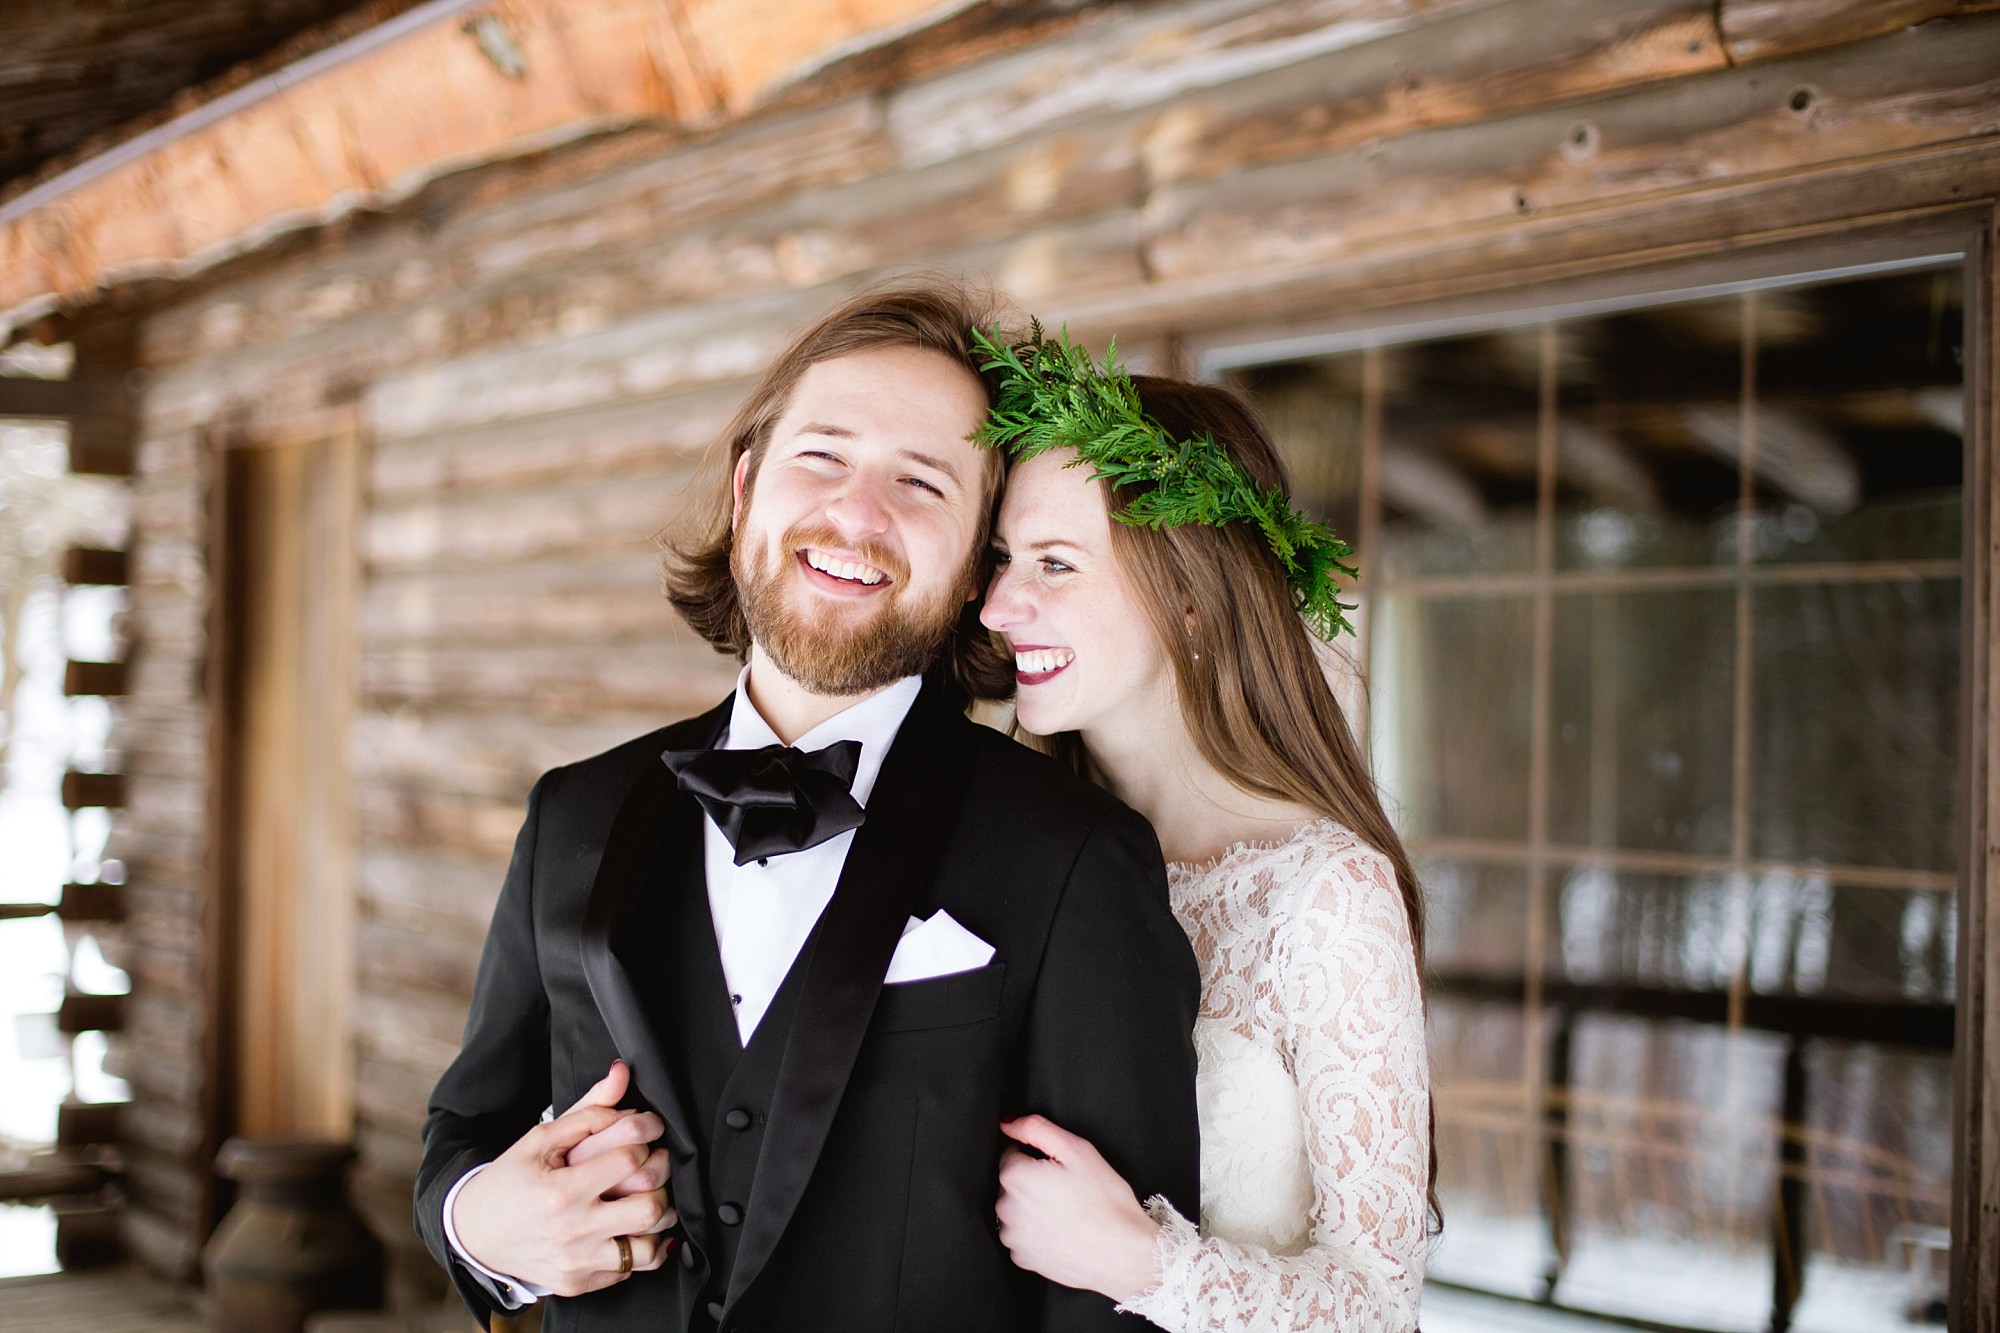 A Michigan Winter Wedding in the woods at Johnson Nature Center in Bloomfield Hills, Michigan by Breanne Rochelle Photography.